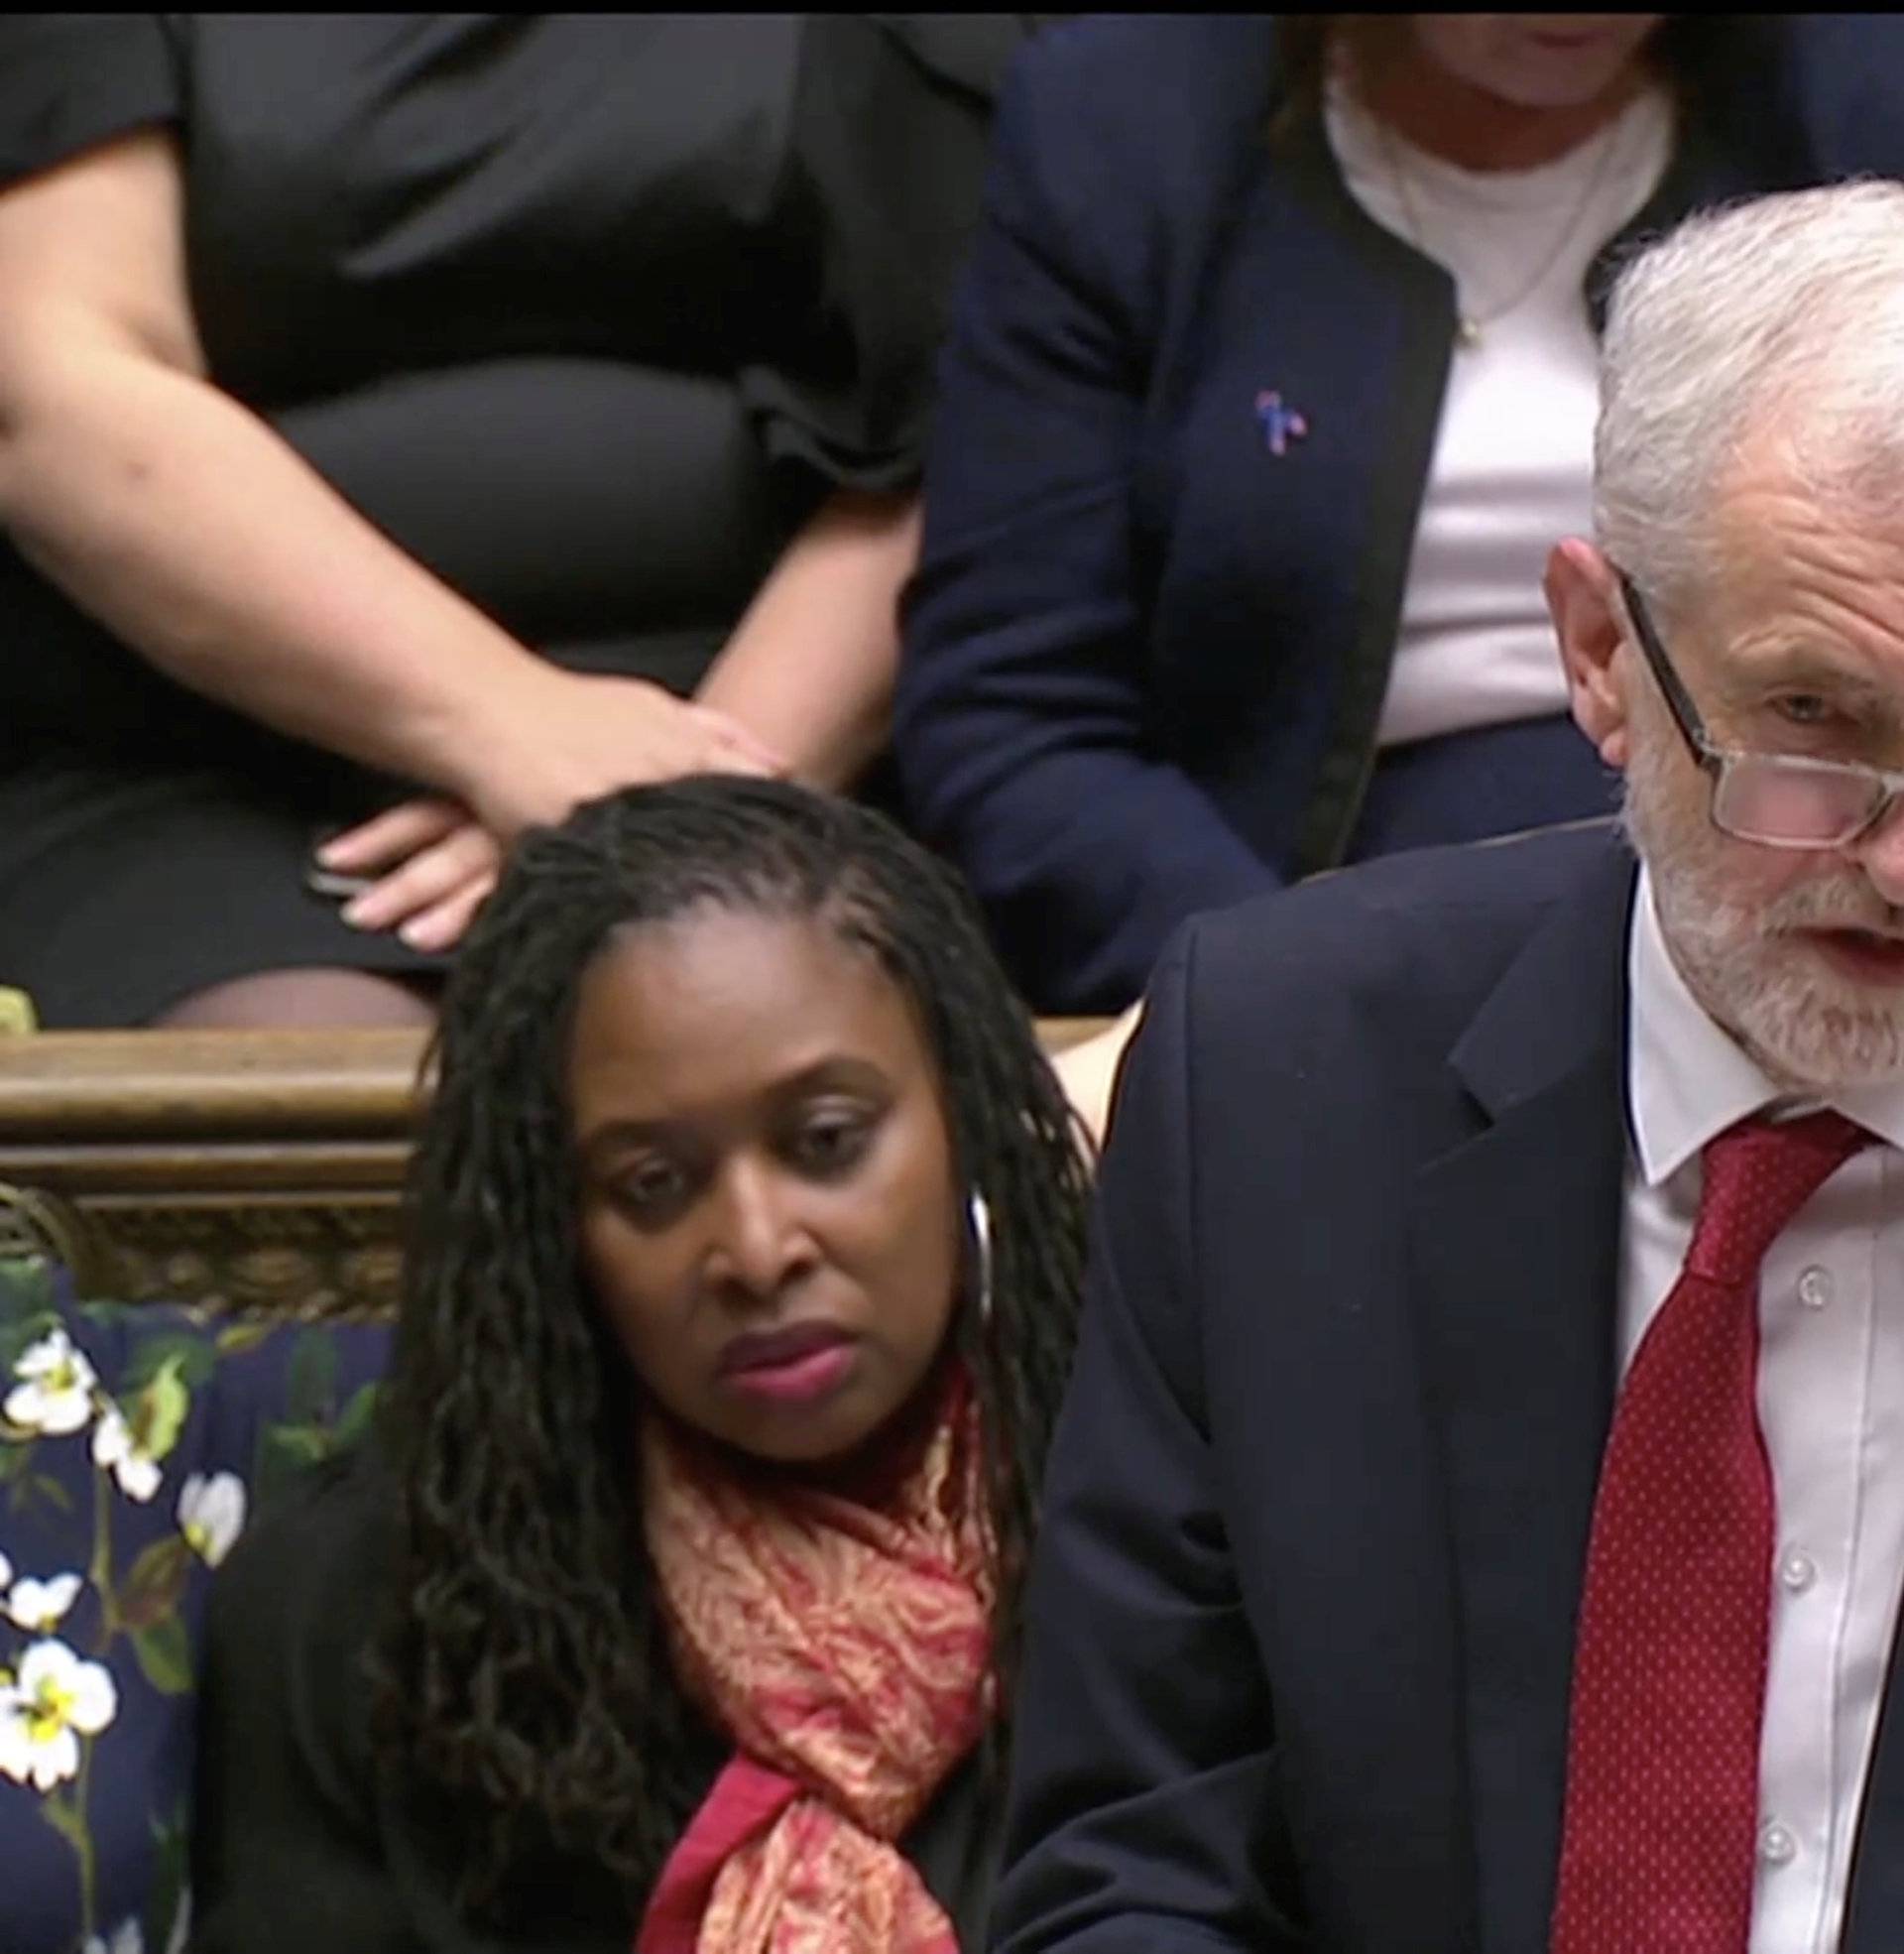 Labour party leader Jeremy Corbyn addresses Parliament after the vote on May's Brexit deal, in London